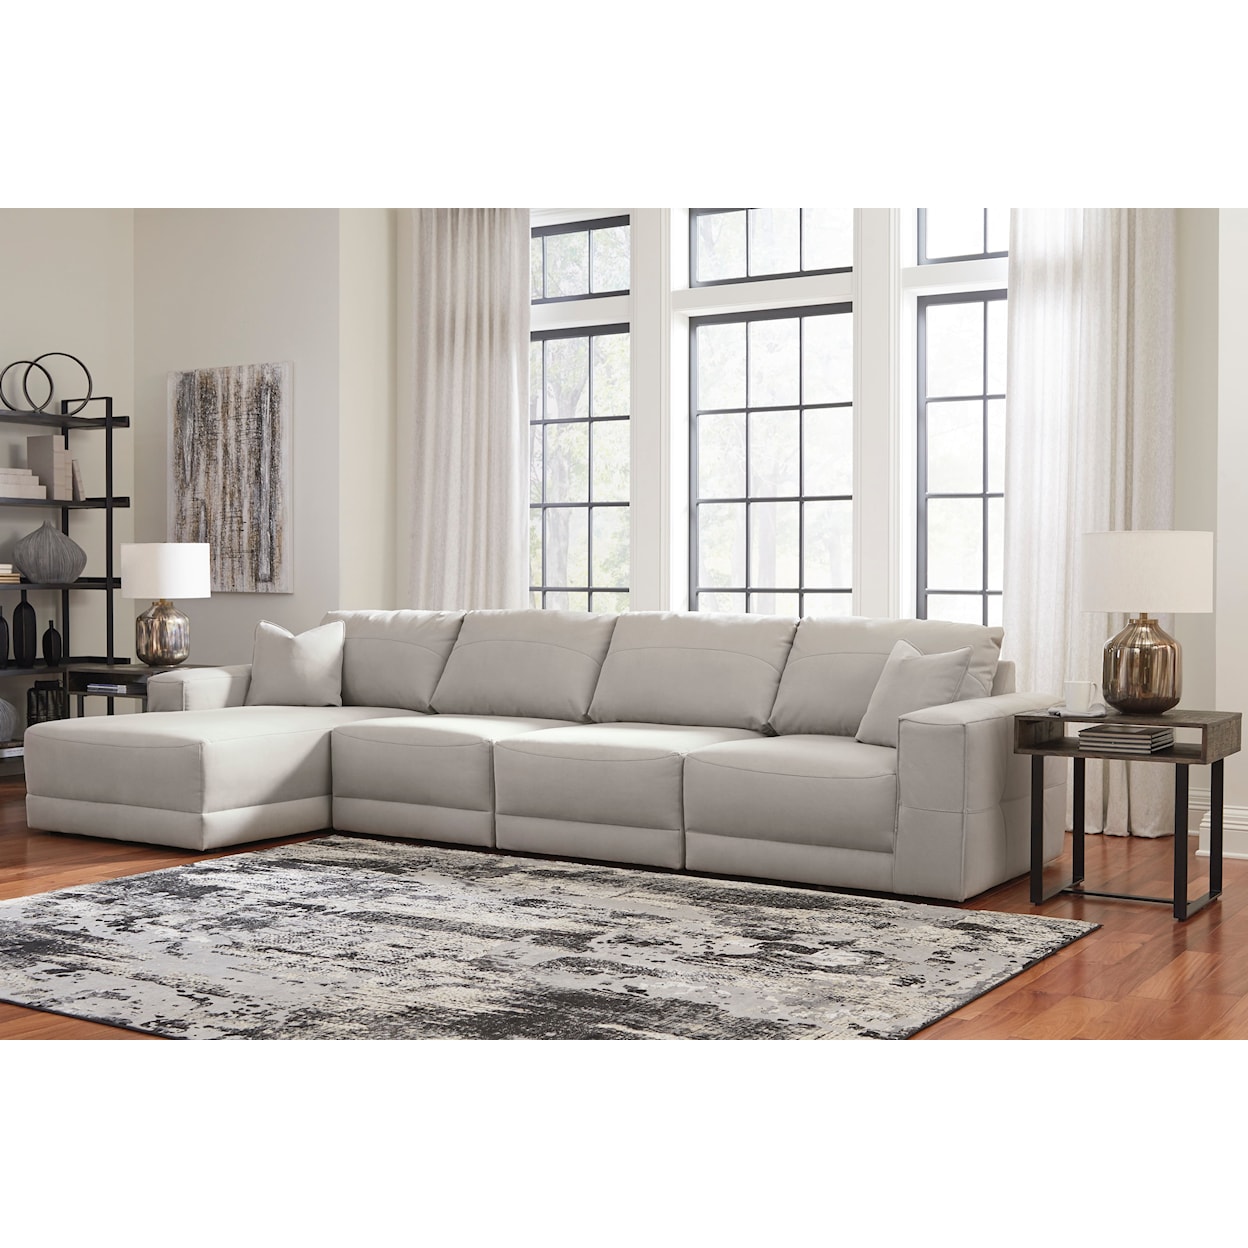 Benchcraft Next-Gen Gaucho 4-Piece Sectional Sofa with Chaise